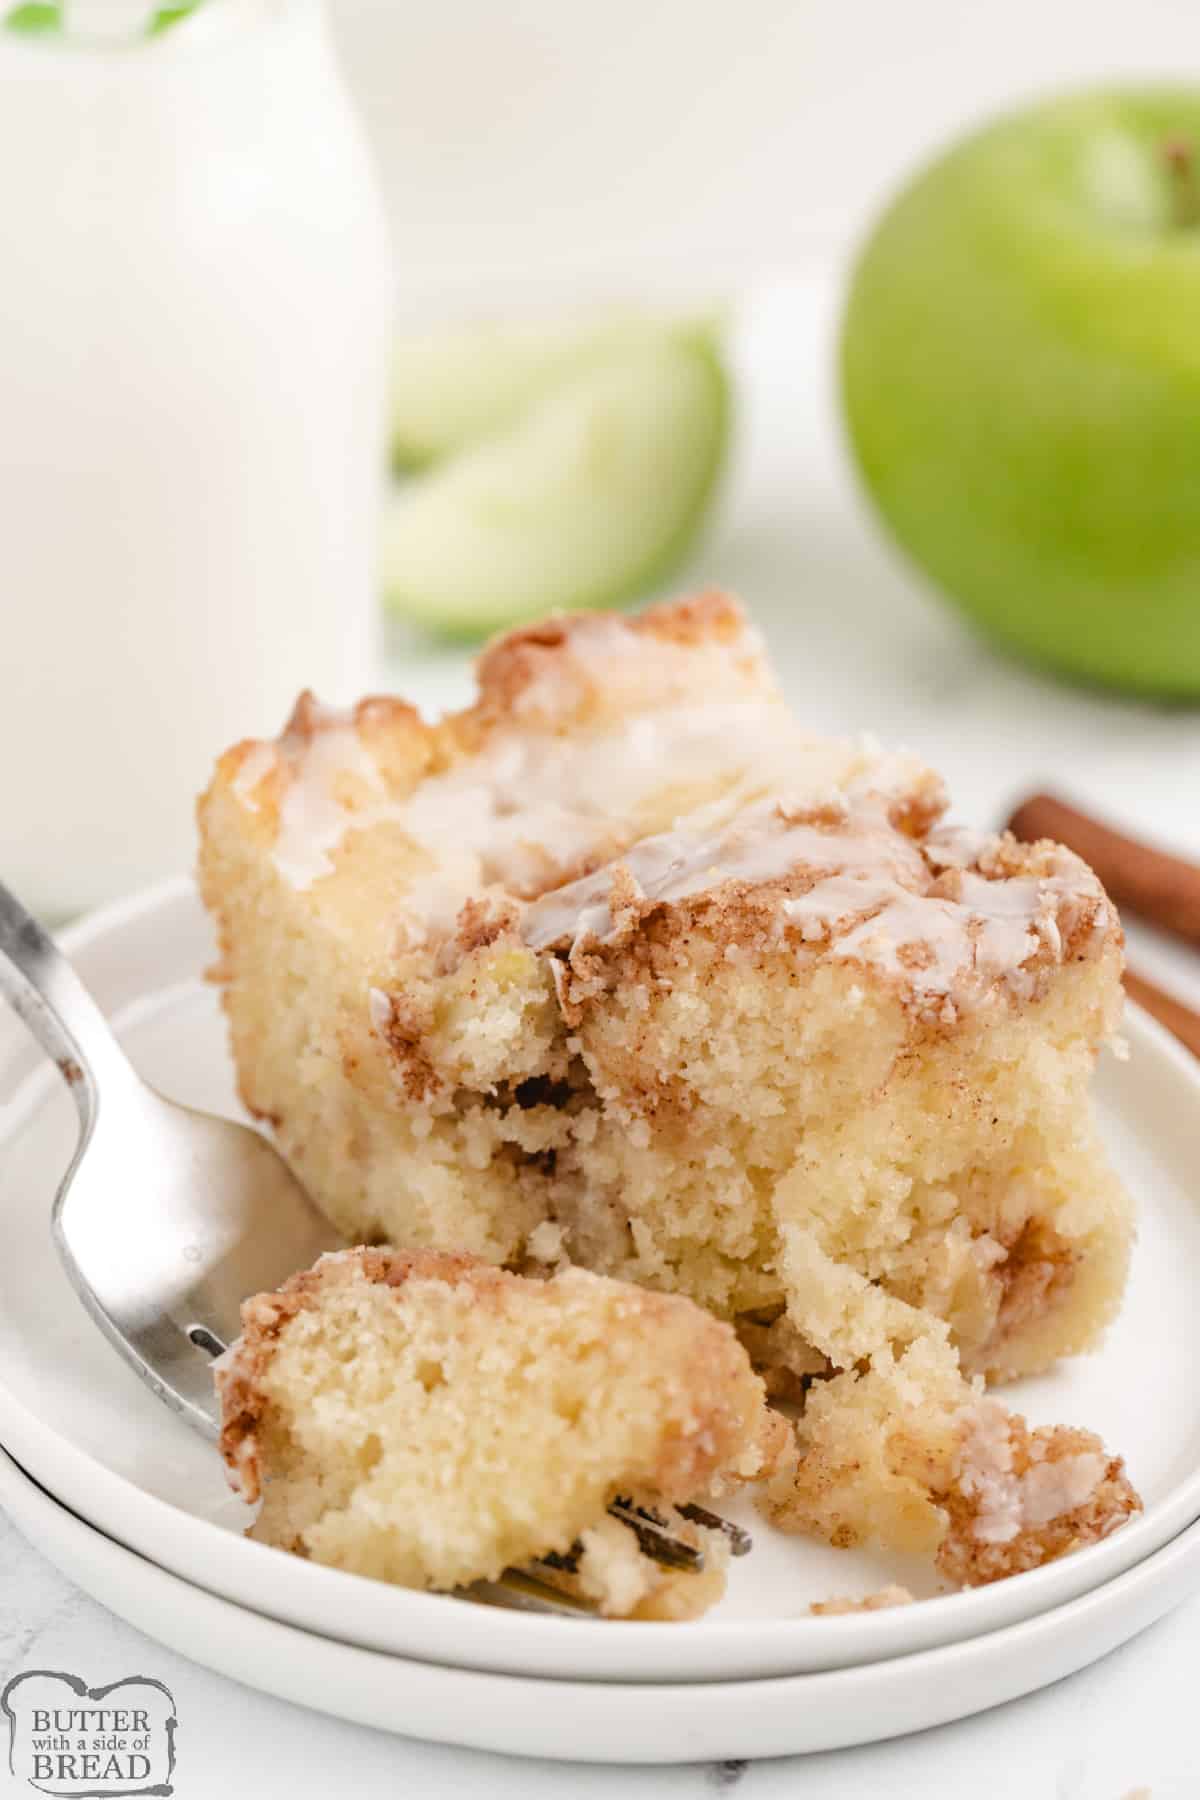 Apple Fritter Cake tastes like your favorite apple donut in cake form! Delicious apple cake recipe made completely from scratch.